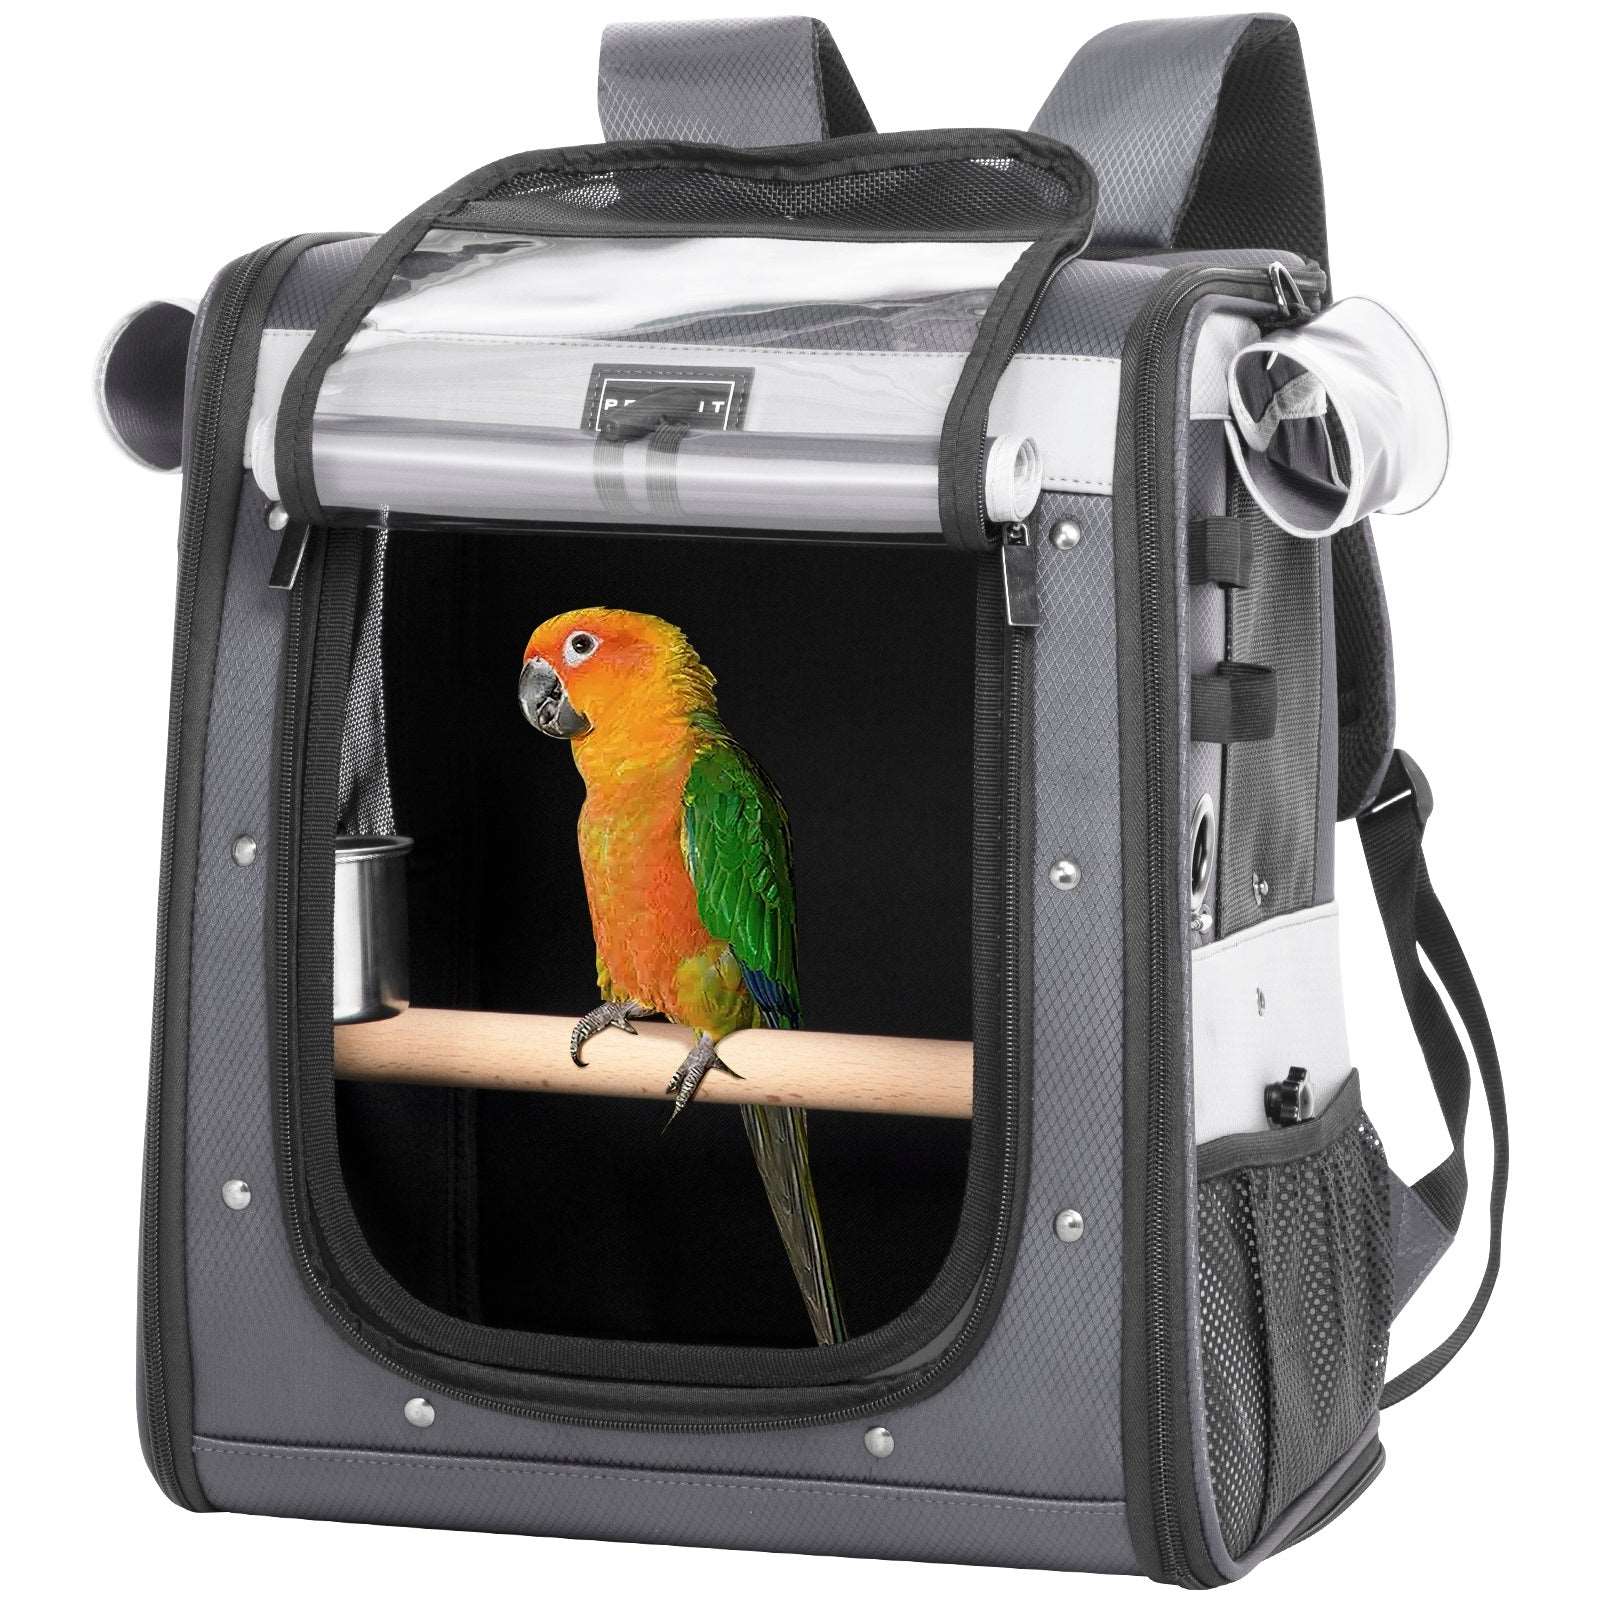 Petsfit-Bird-Carrier-with-Shade-Cover-01